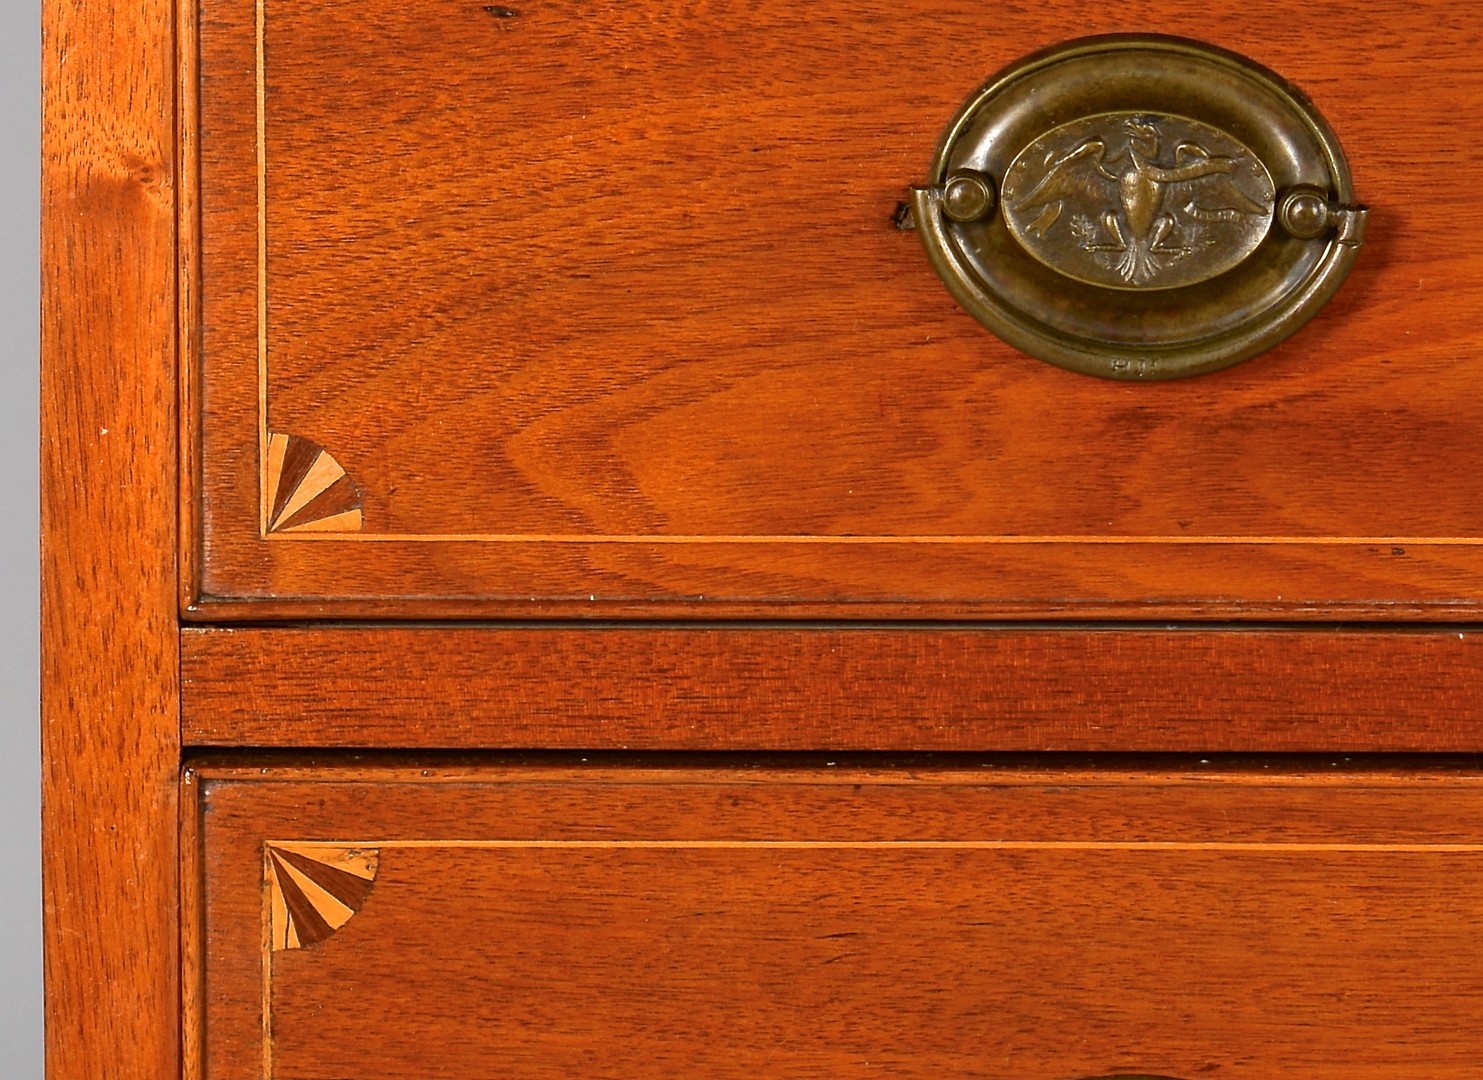 Lot 166: East TN Federal Inlaid Chest of Drawers